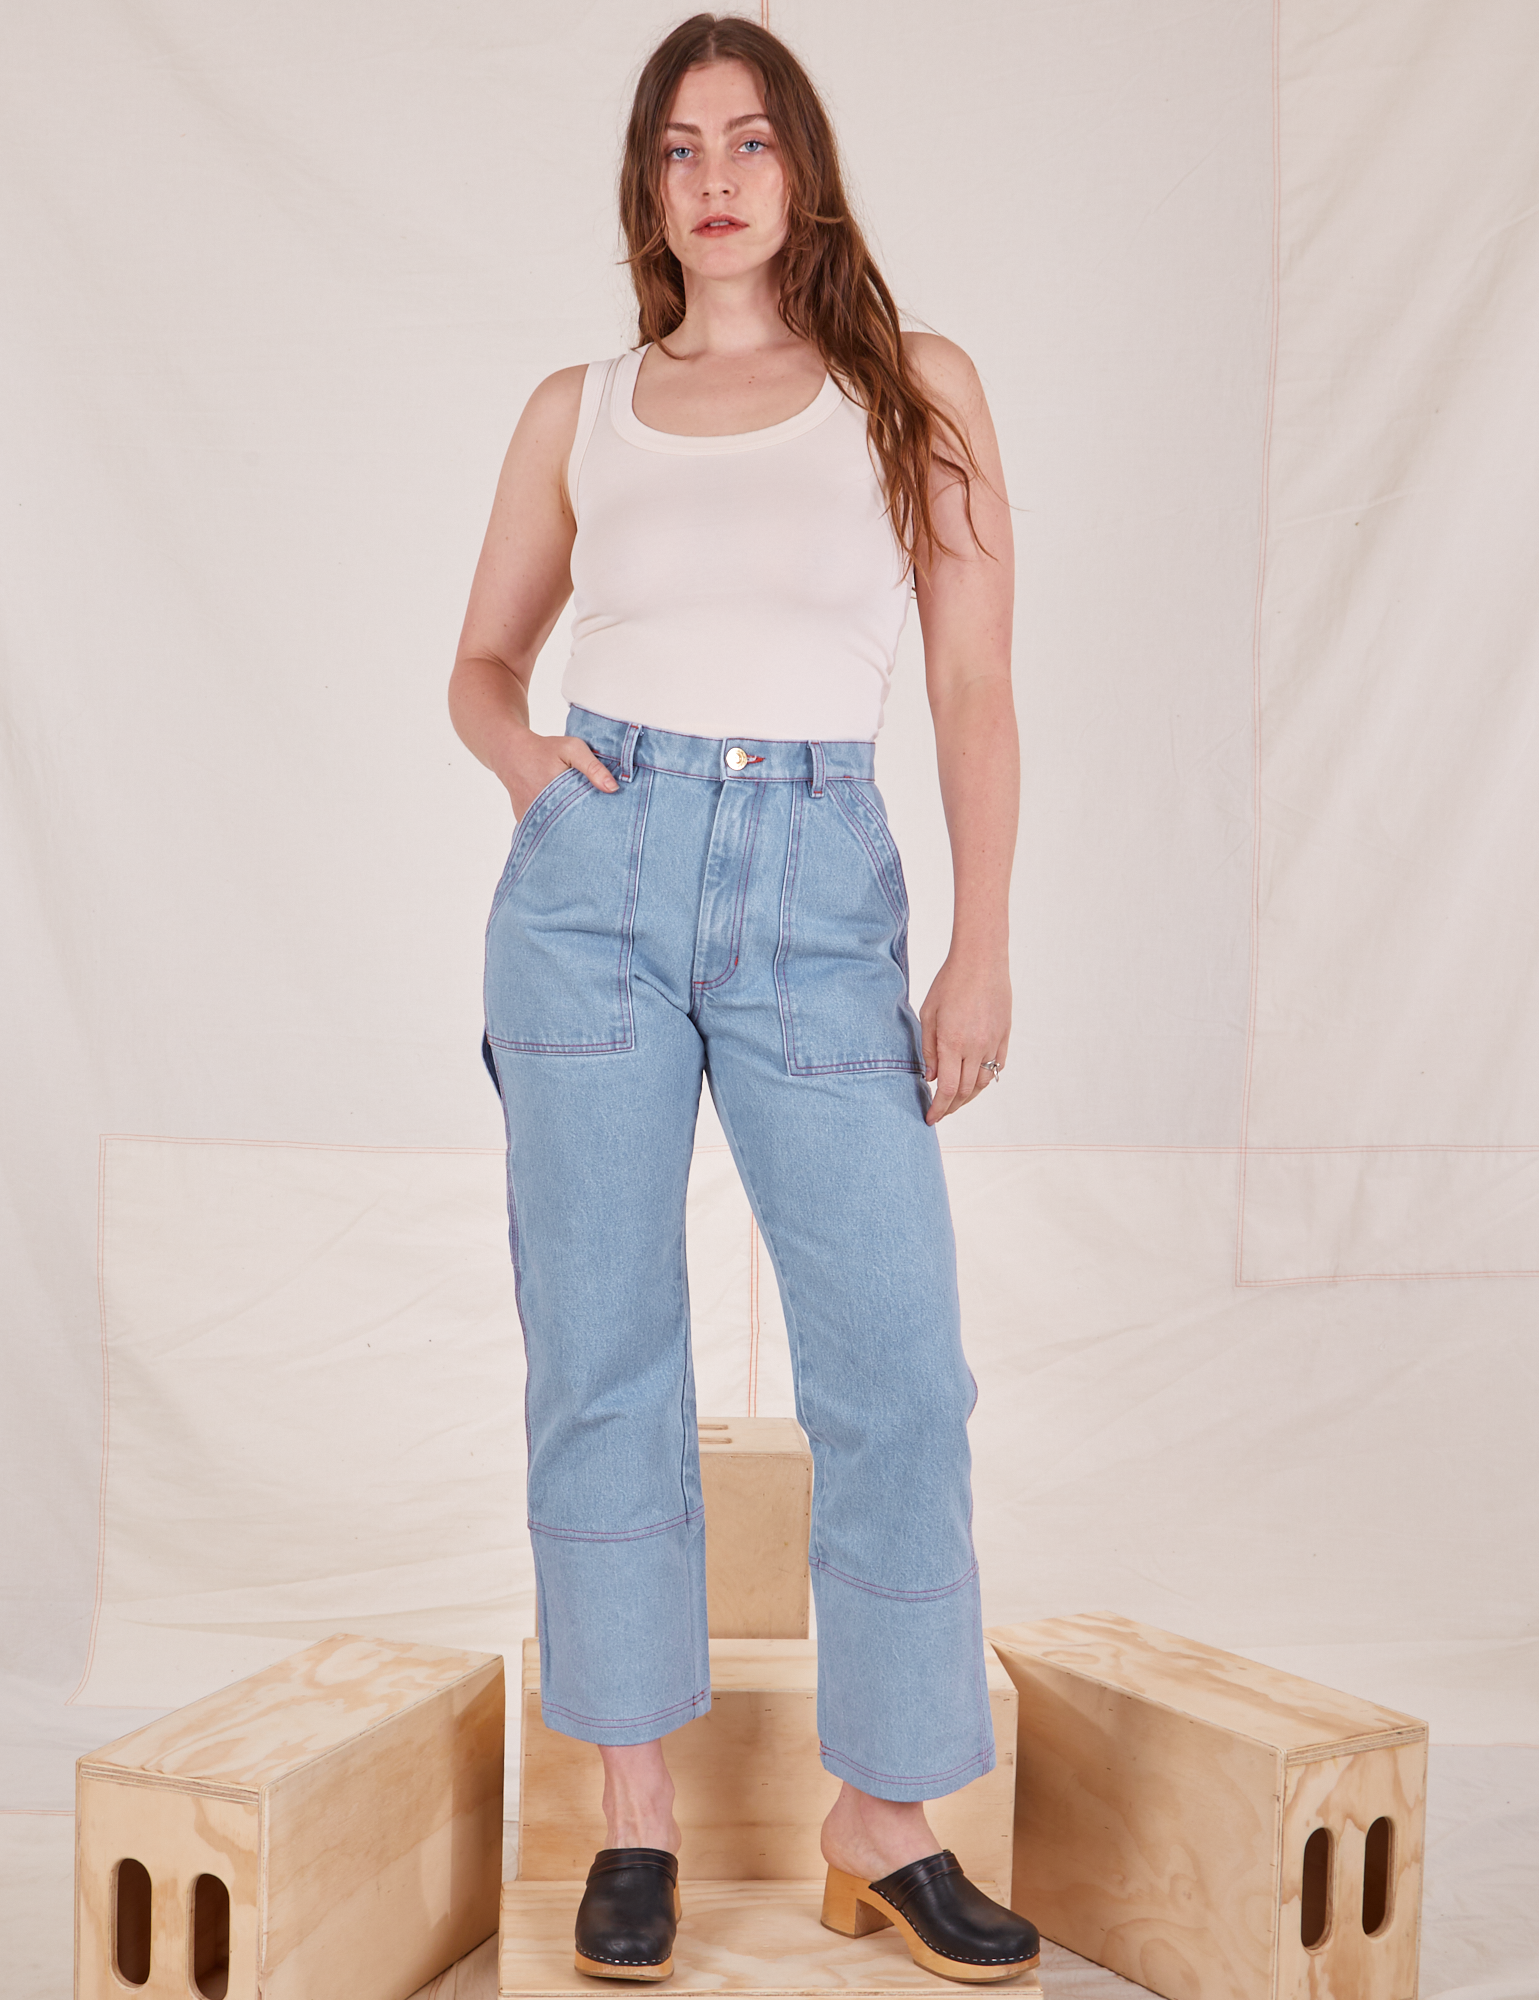 Allison is 5&#39;10&quot; and wearing S Carpenter Jeans in Light Wash paired with vintage off-white Tank Top